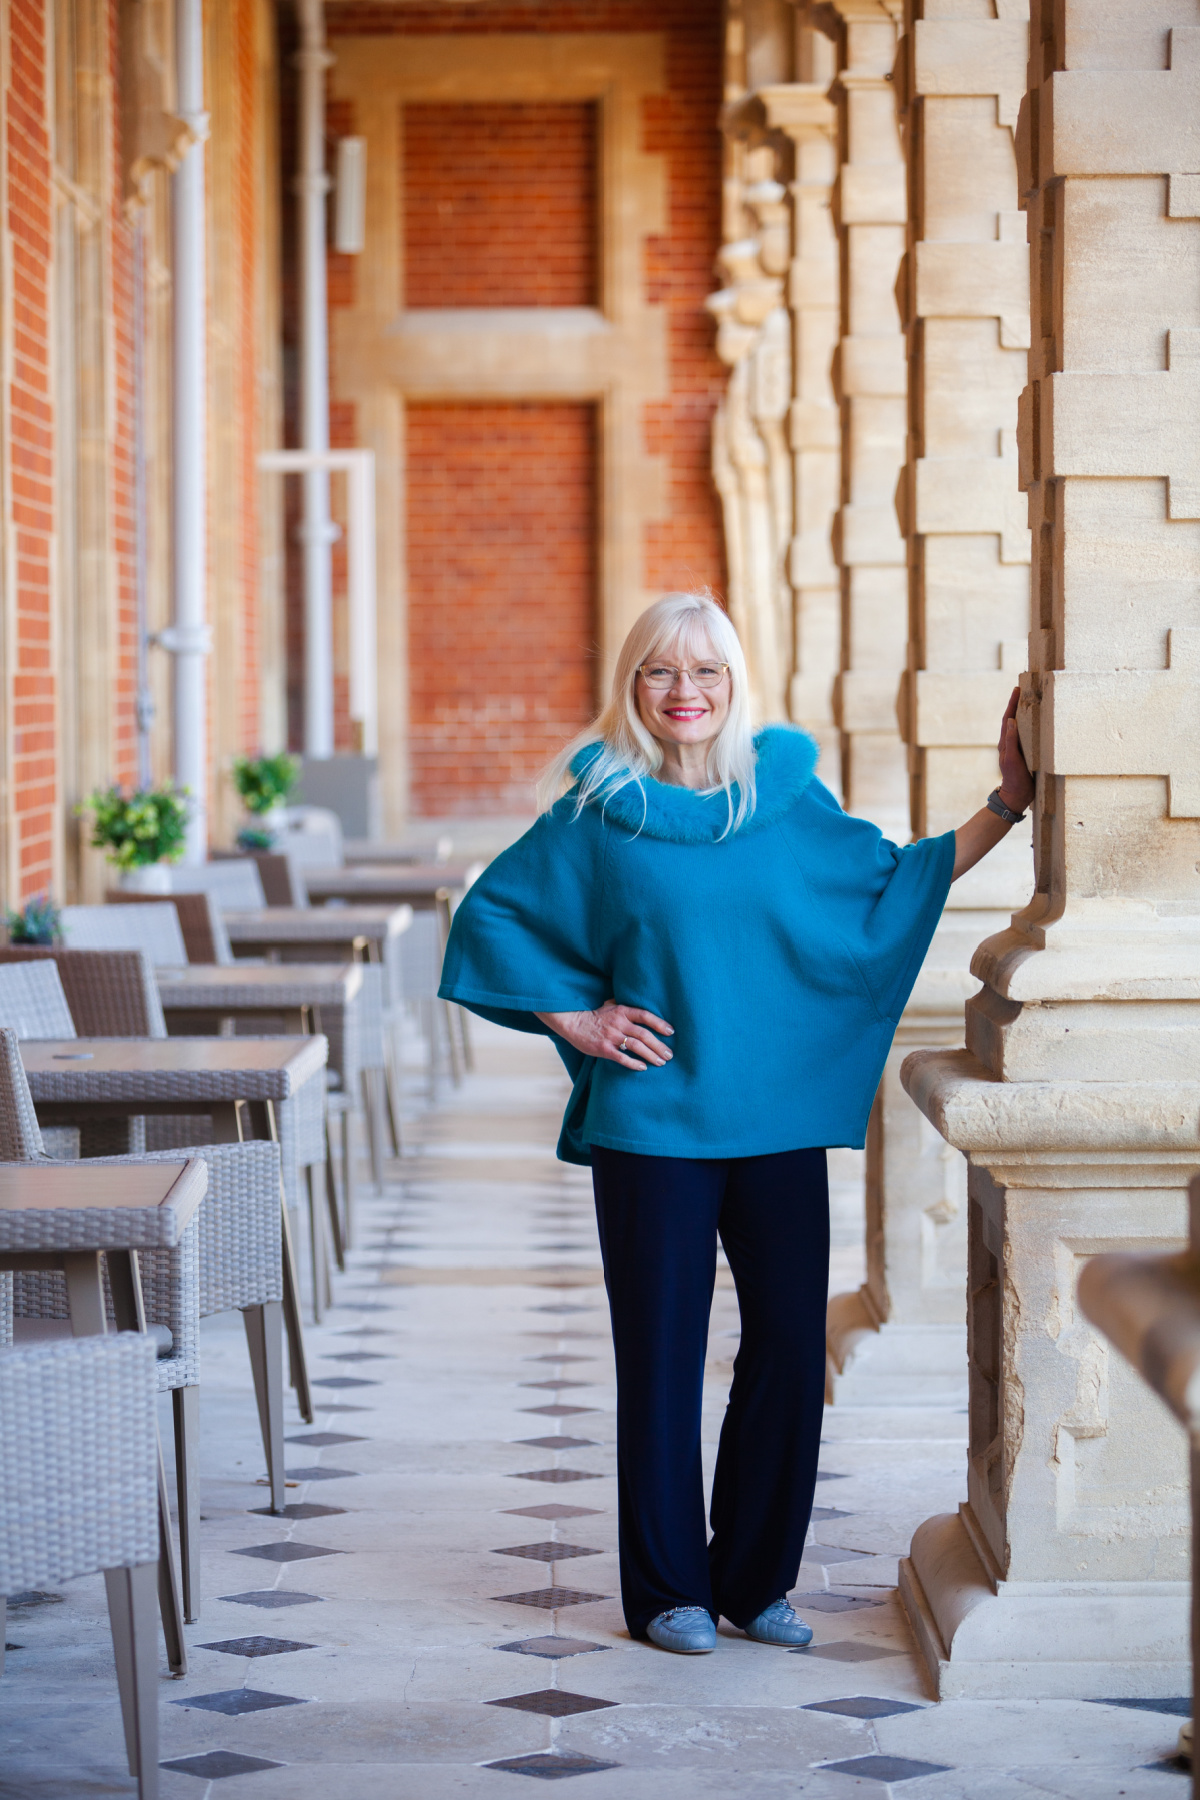 Adding colour to your wardrobe - April J Harris wearing a turquoise poncho and standing by a pillar 